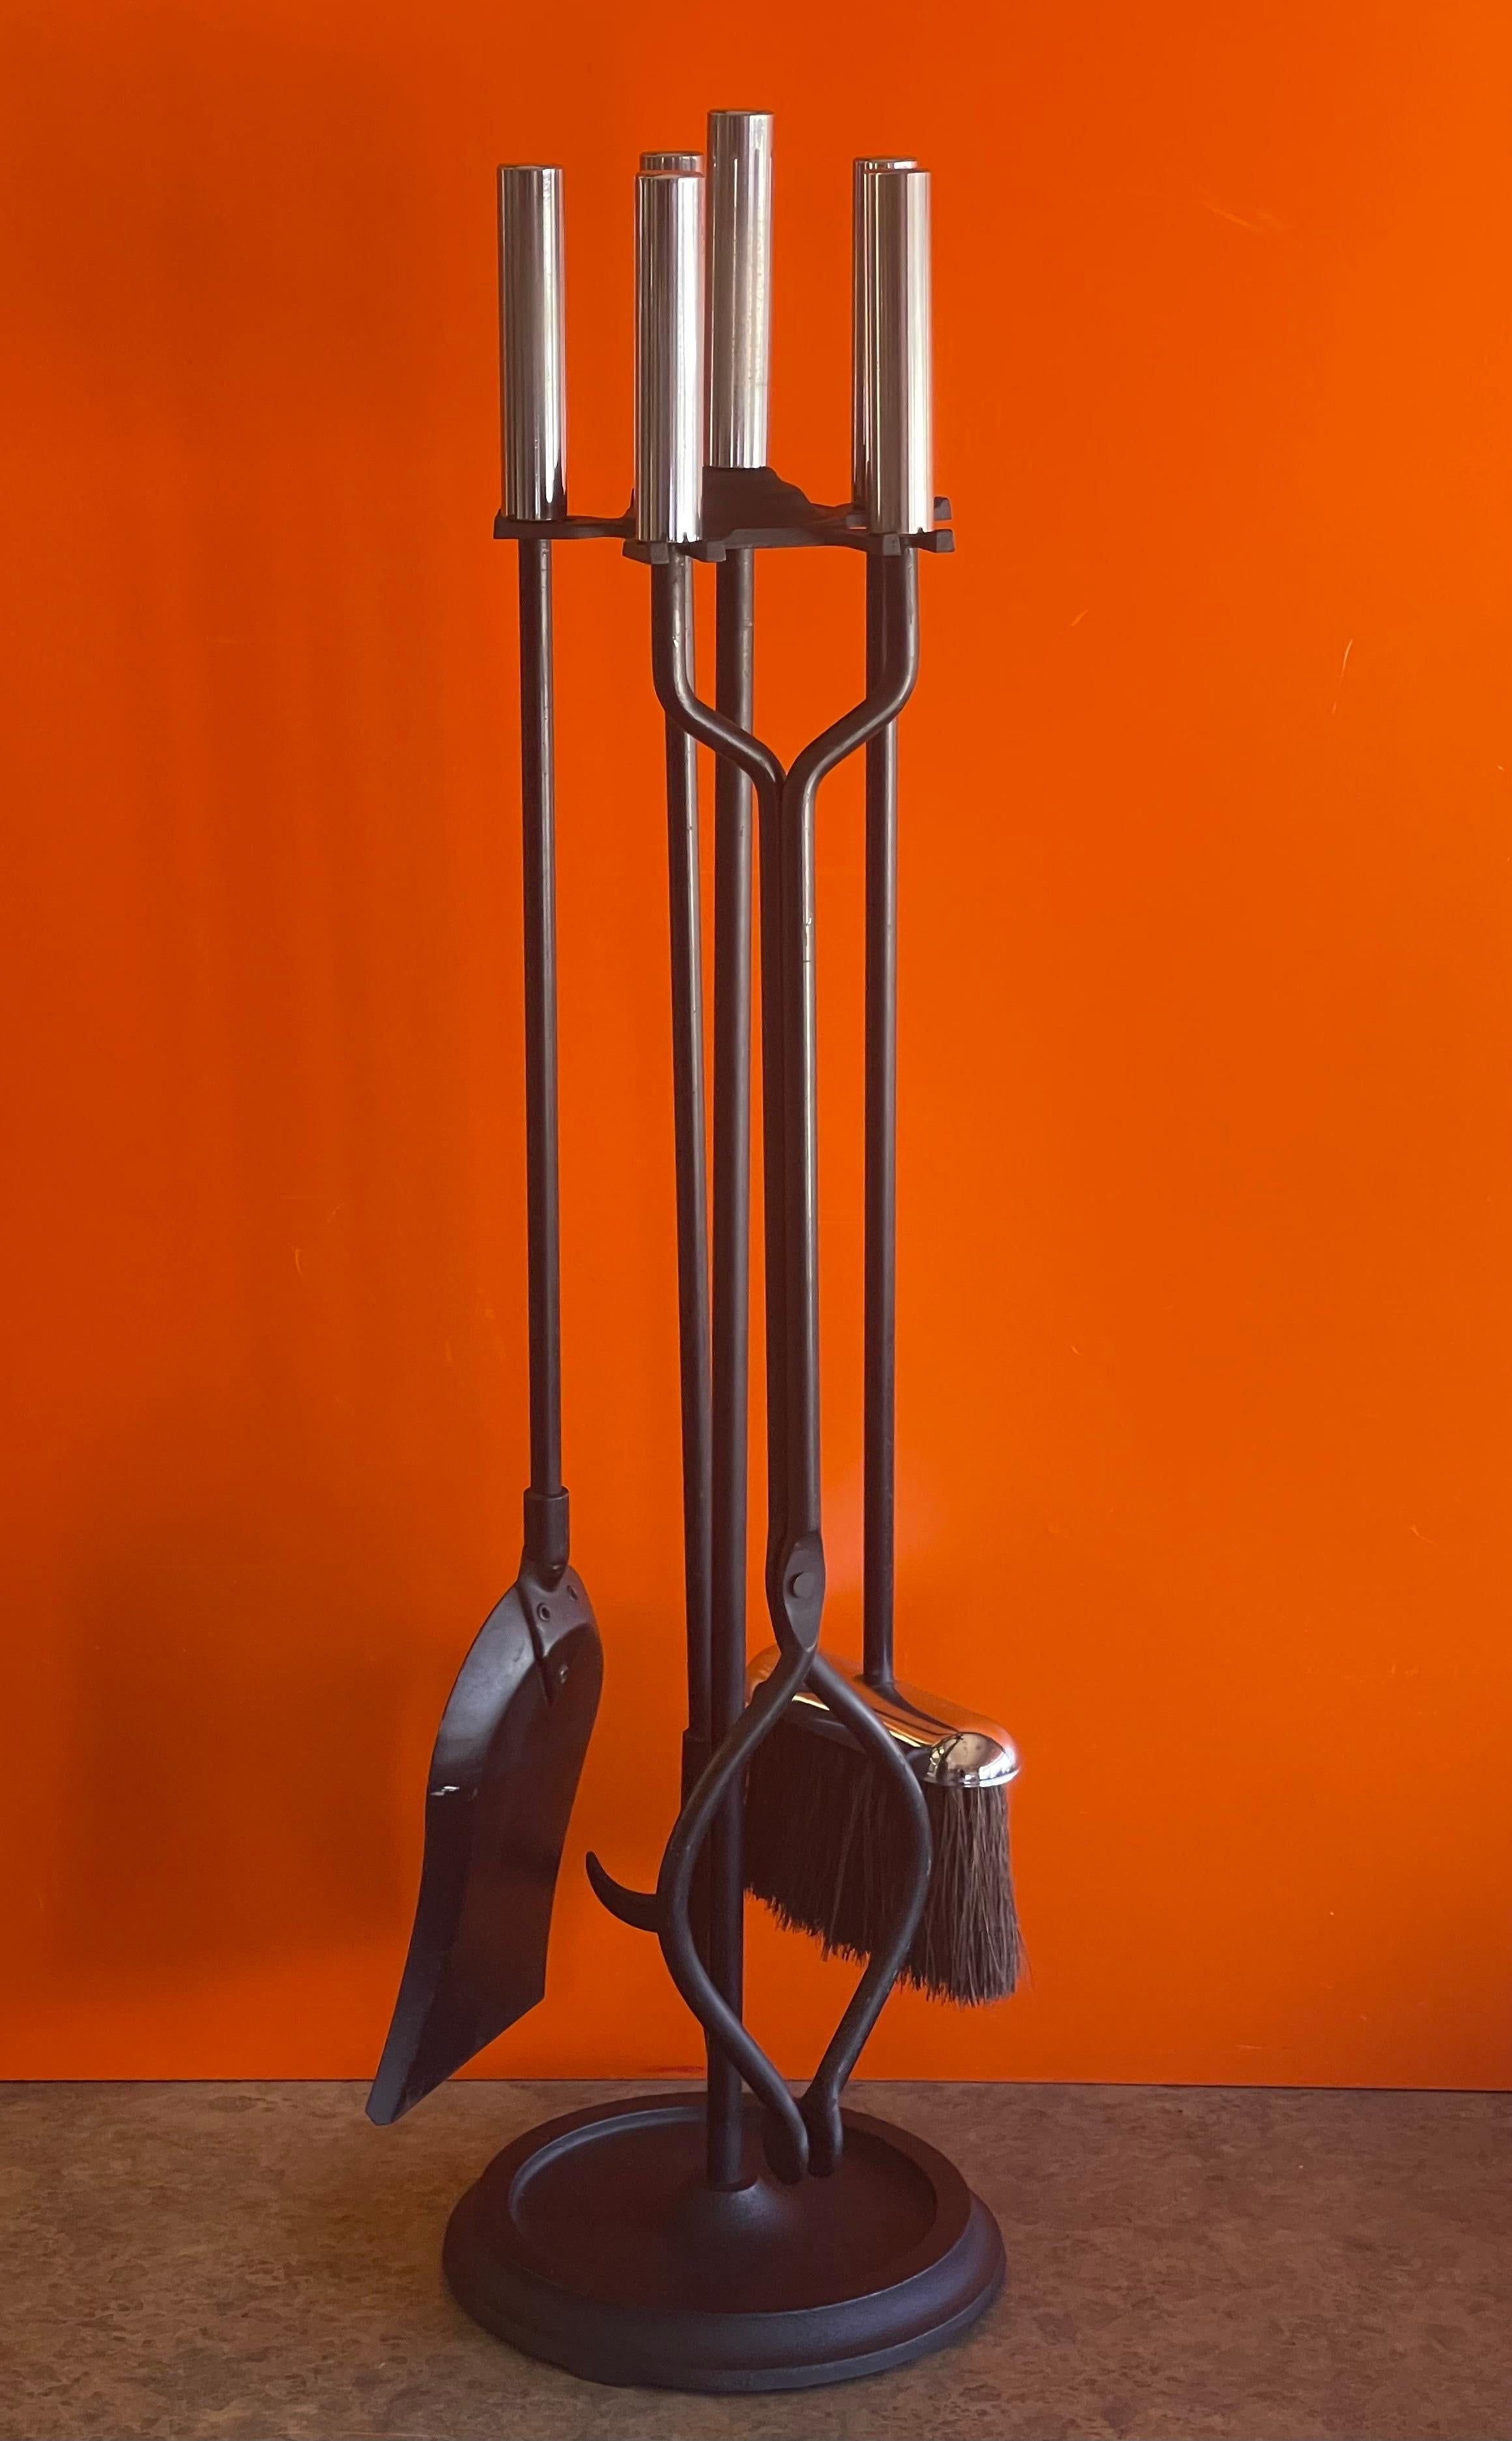 Modernist set of four stainless steel handled fireplace tools and stand, circa 2000s. There are four tools (shovel, brush, log holder and poker) and a single column stand in very good vintage condition. The set is very heavy and well made; it